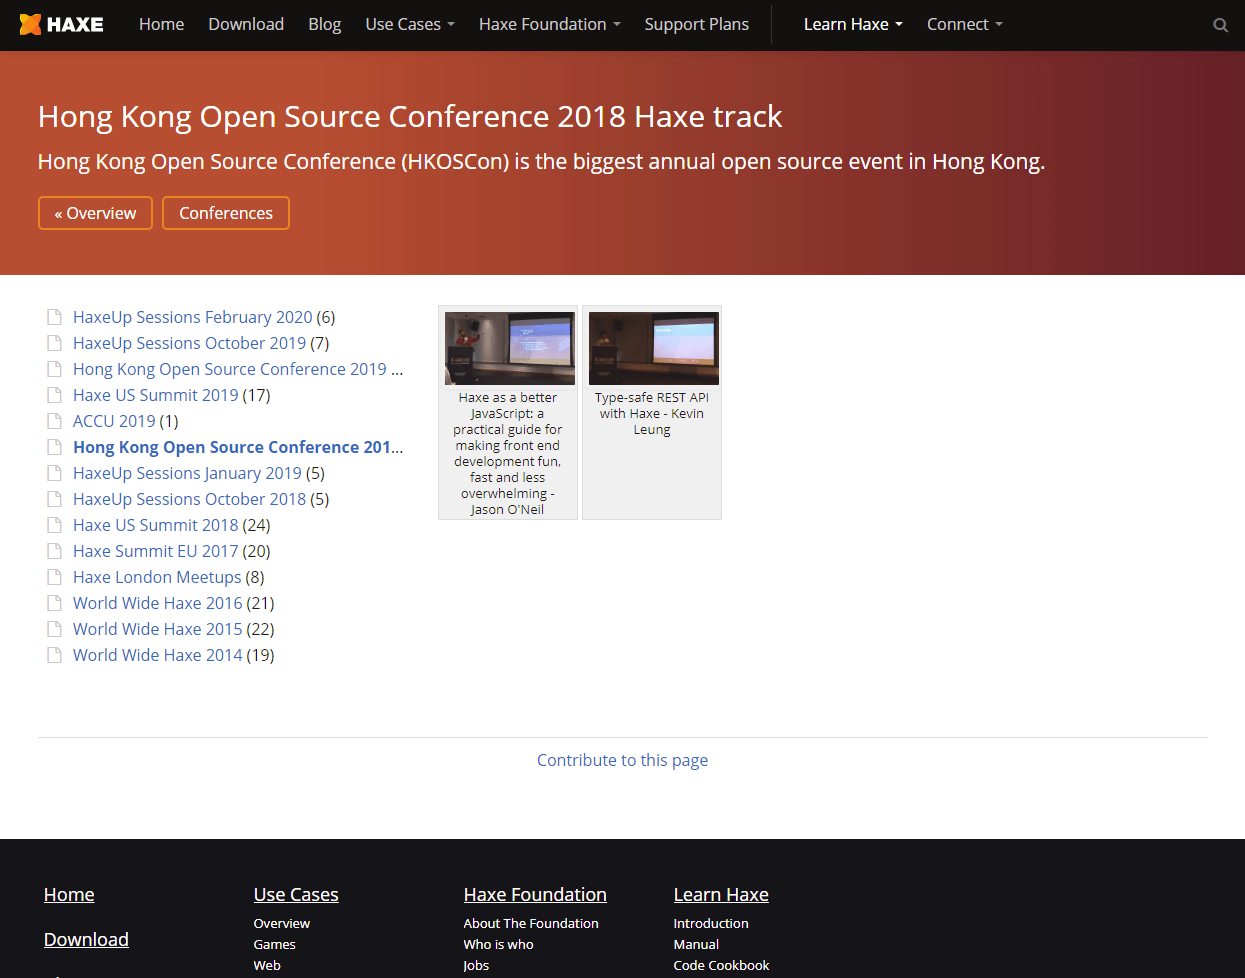 Hong Kong Open Source Conference 2018 Haxe track